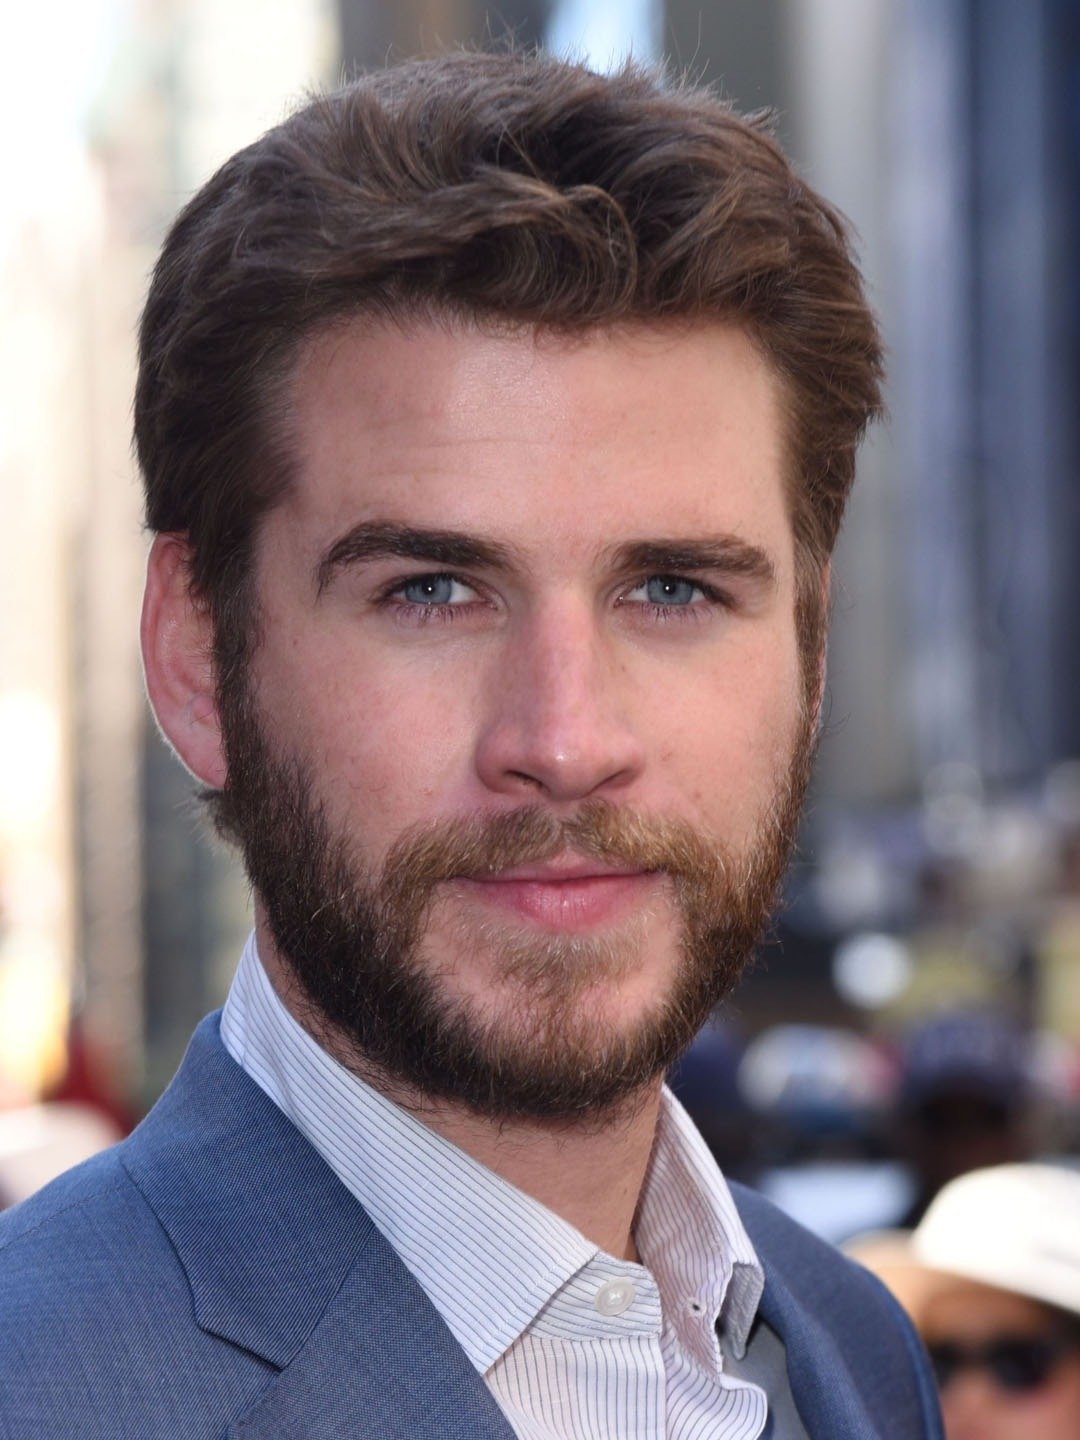 How tall is Liam Hemsworth?